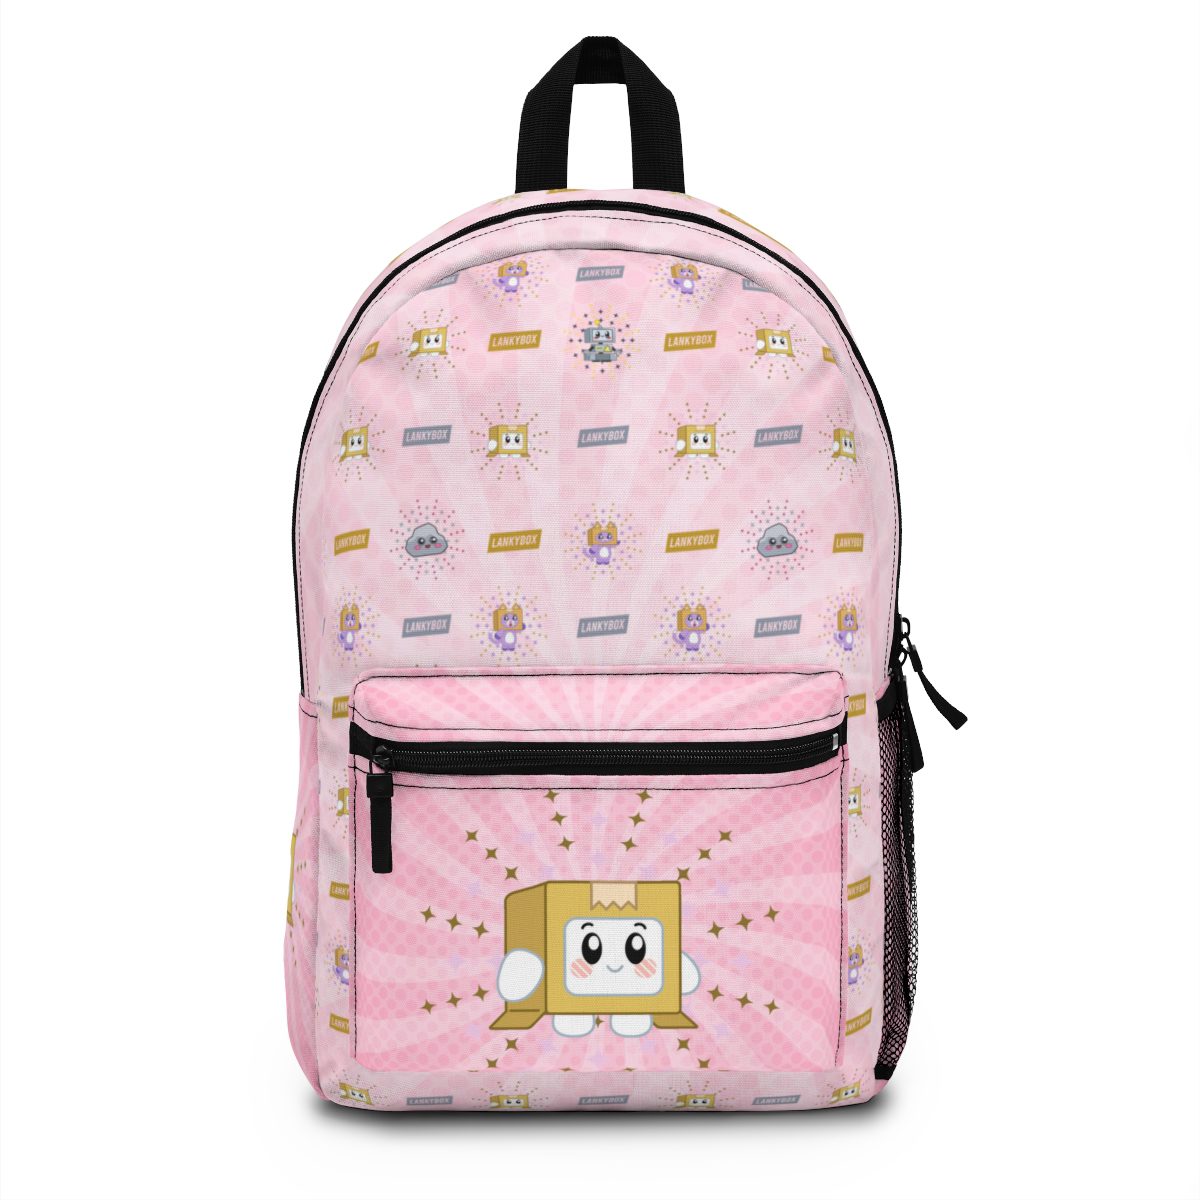 Lankybox Cute Character Boxy on Front Pocket Pink Backpack Cool Kiddo 10